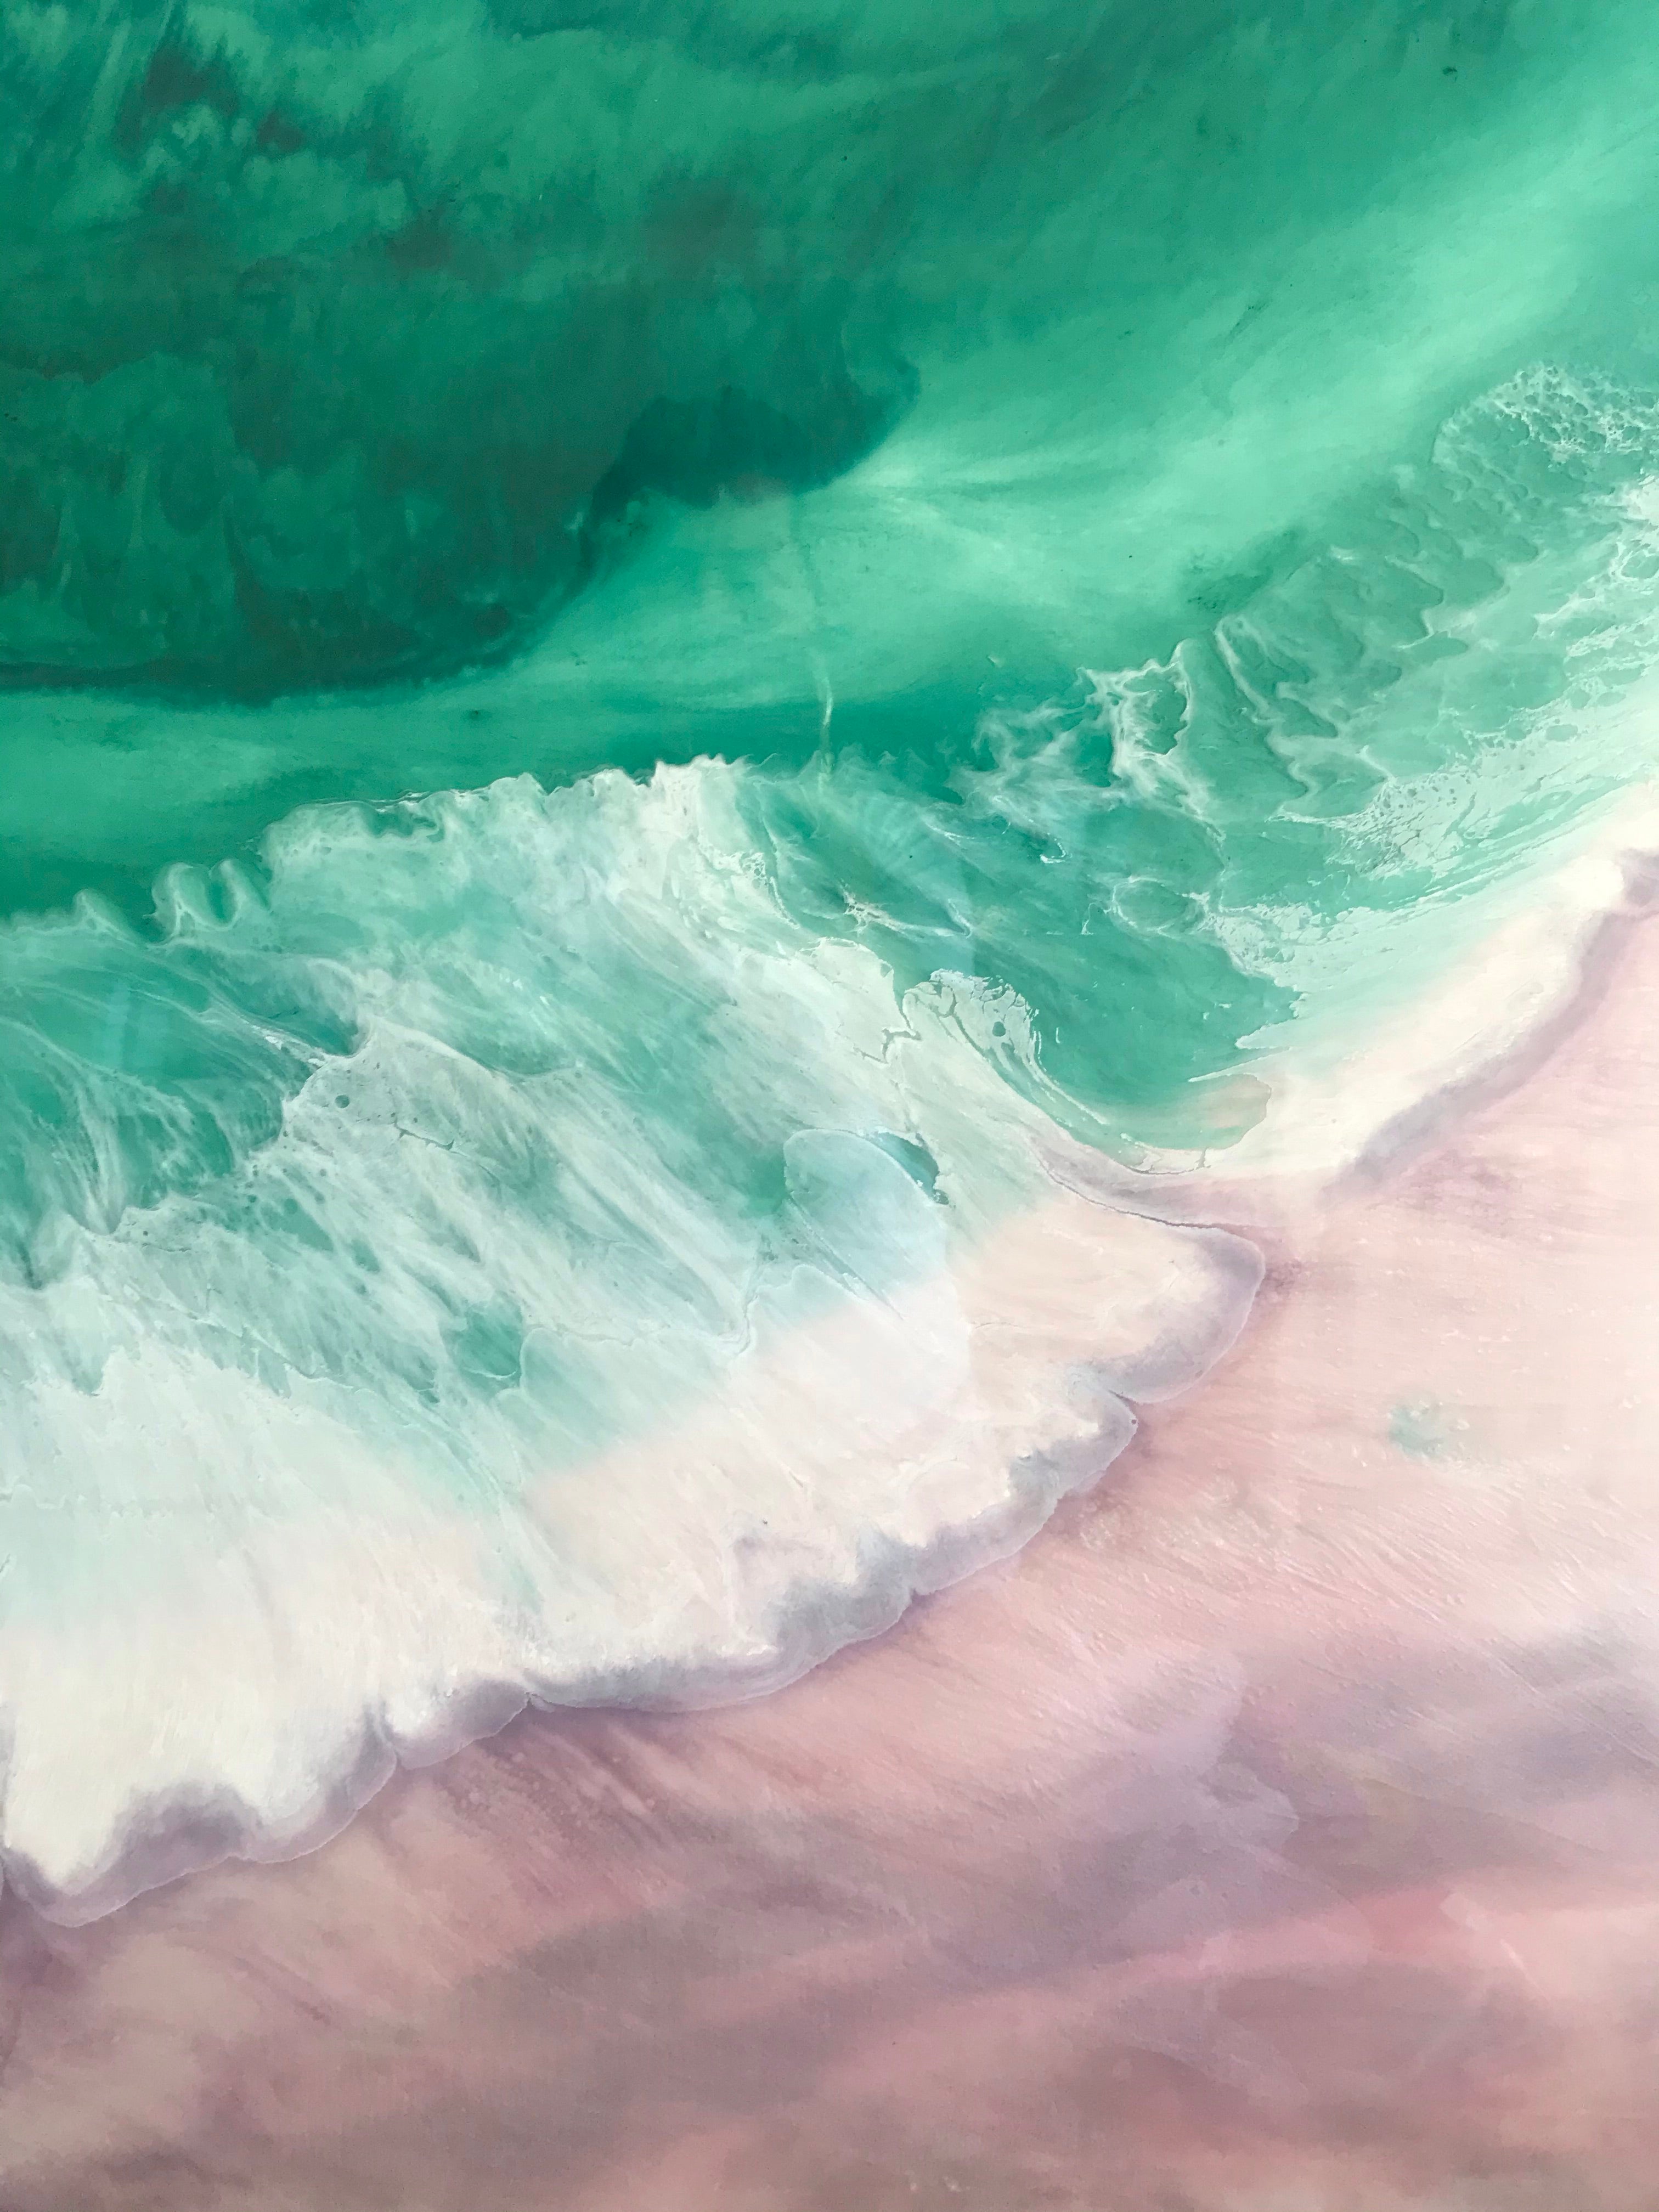 Teal Abstract Artwork. Ocean Blue. Bronte Undercurrent. Antuanelle 7 Undercurrent. Green and Pink Abstract. Original 90x120 cm